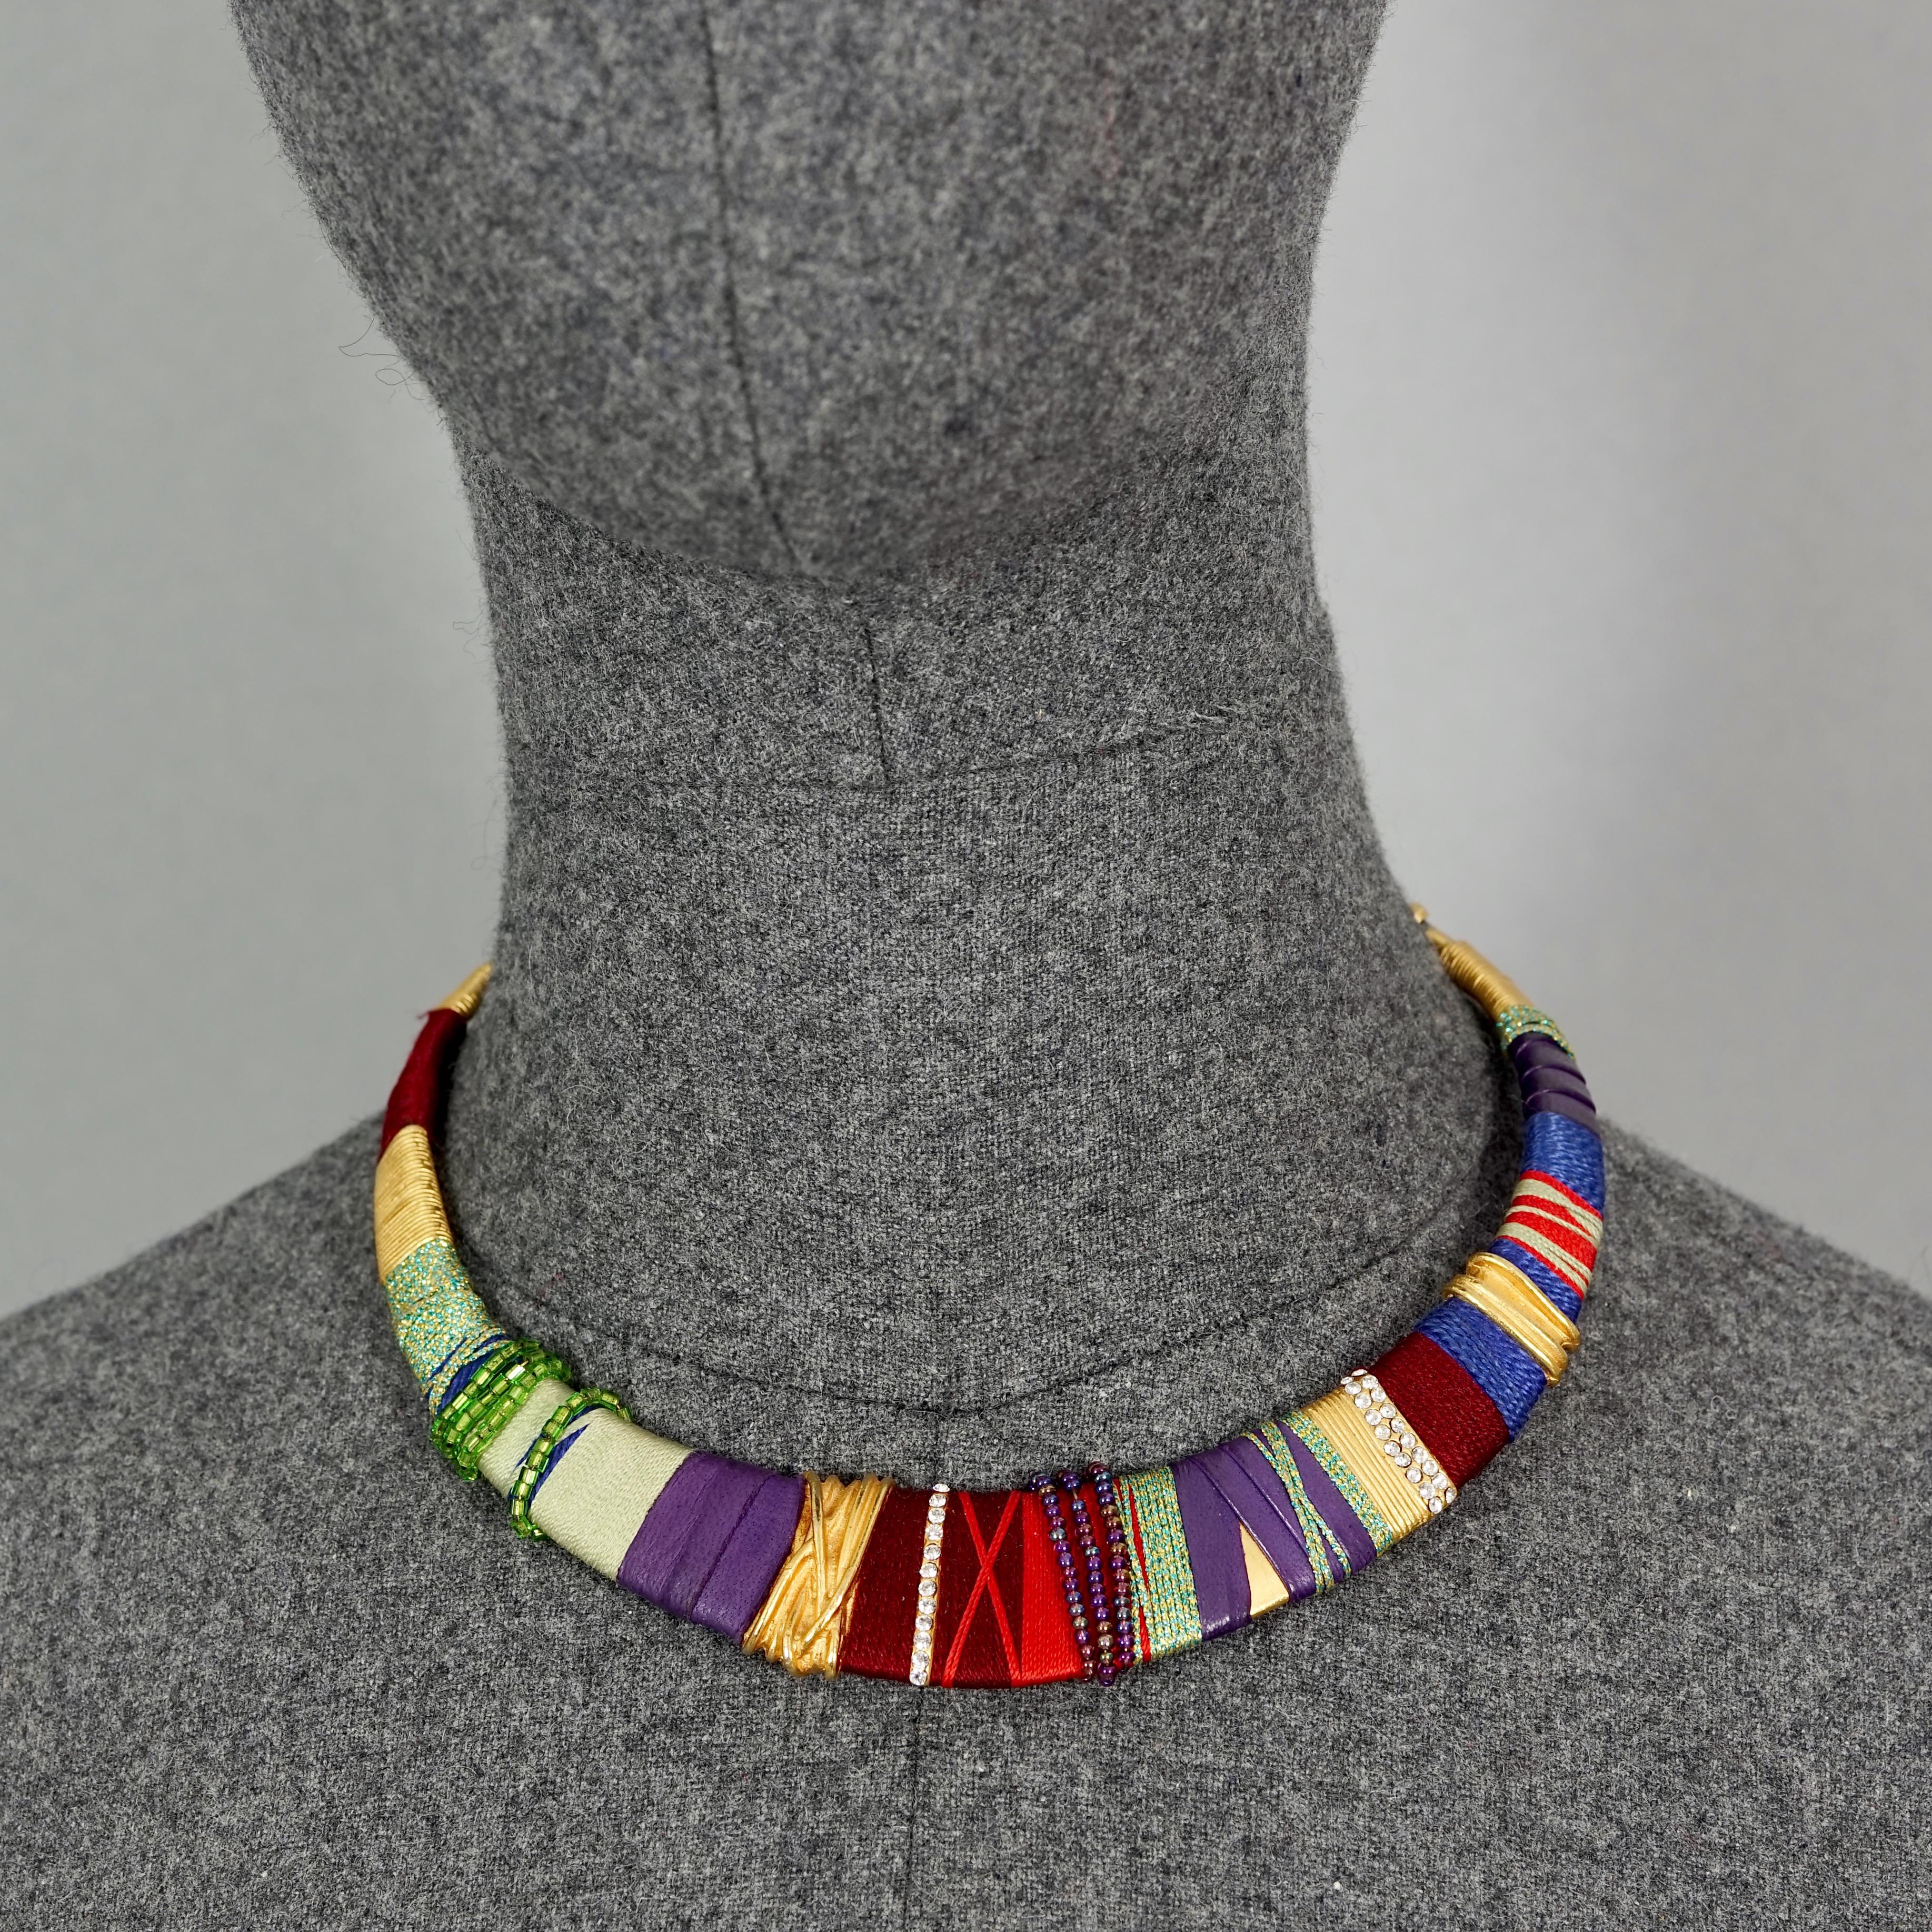 Vintage CHRISTIAN LACROIX Ethnic Masai Rigid Choker Necklace

Measurements:
Height: 0.94 inch (2.4 cm)
Wearable Length: 14.96 inches (38 cm)

Features:
- 100% Authentic CHRISTIAN LACROIX.
- Colourful ethnic Masai choker necklace with wrapped thread,